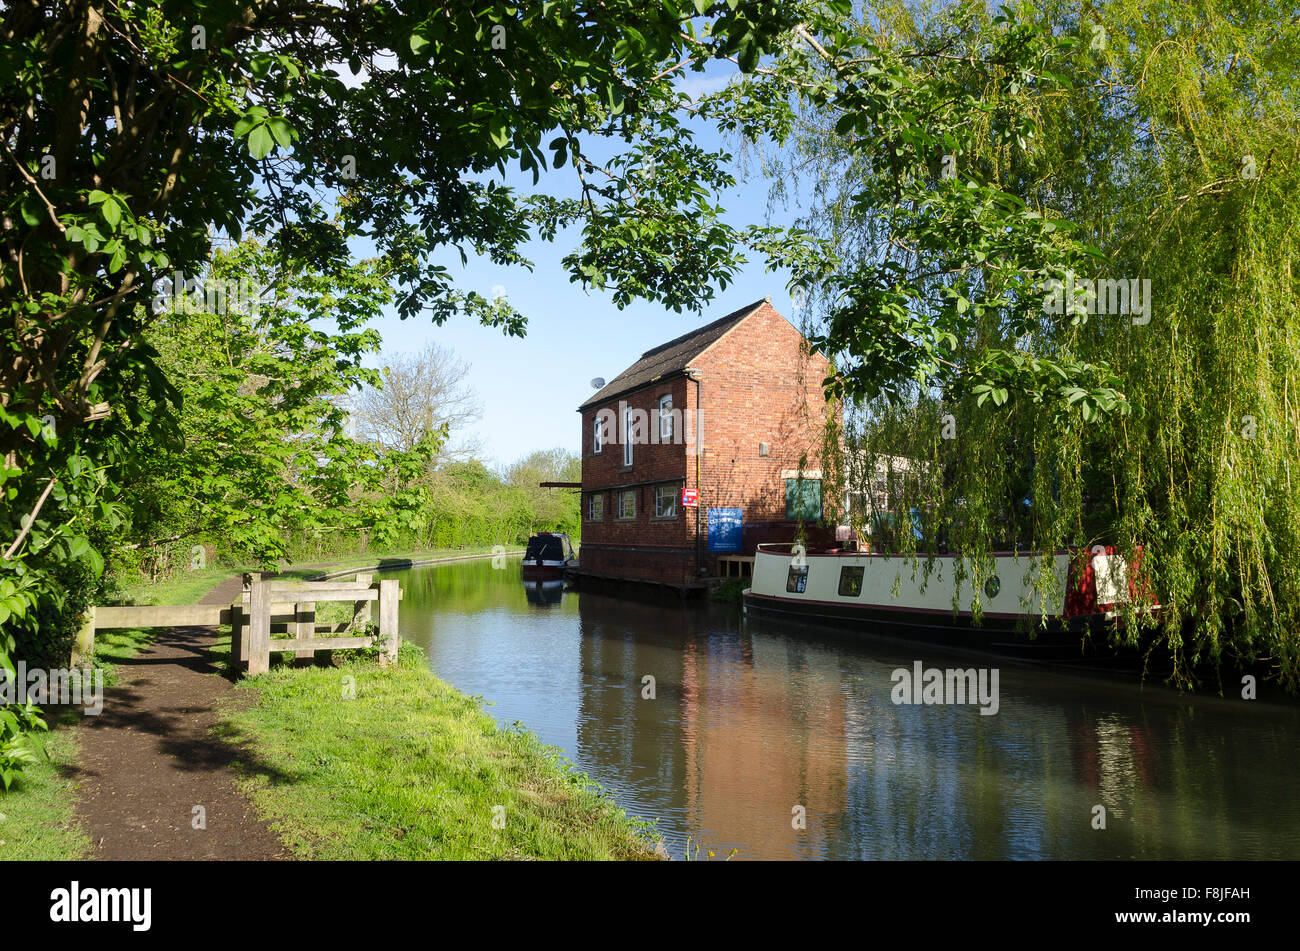 Boats on Oxford Canal, Rugby, Warwickshire, England Stock Photo